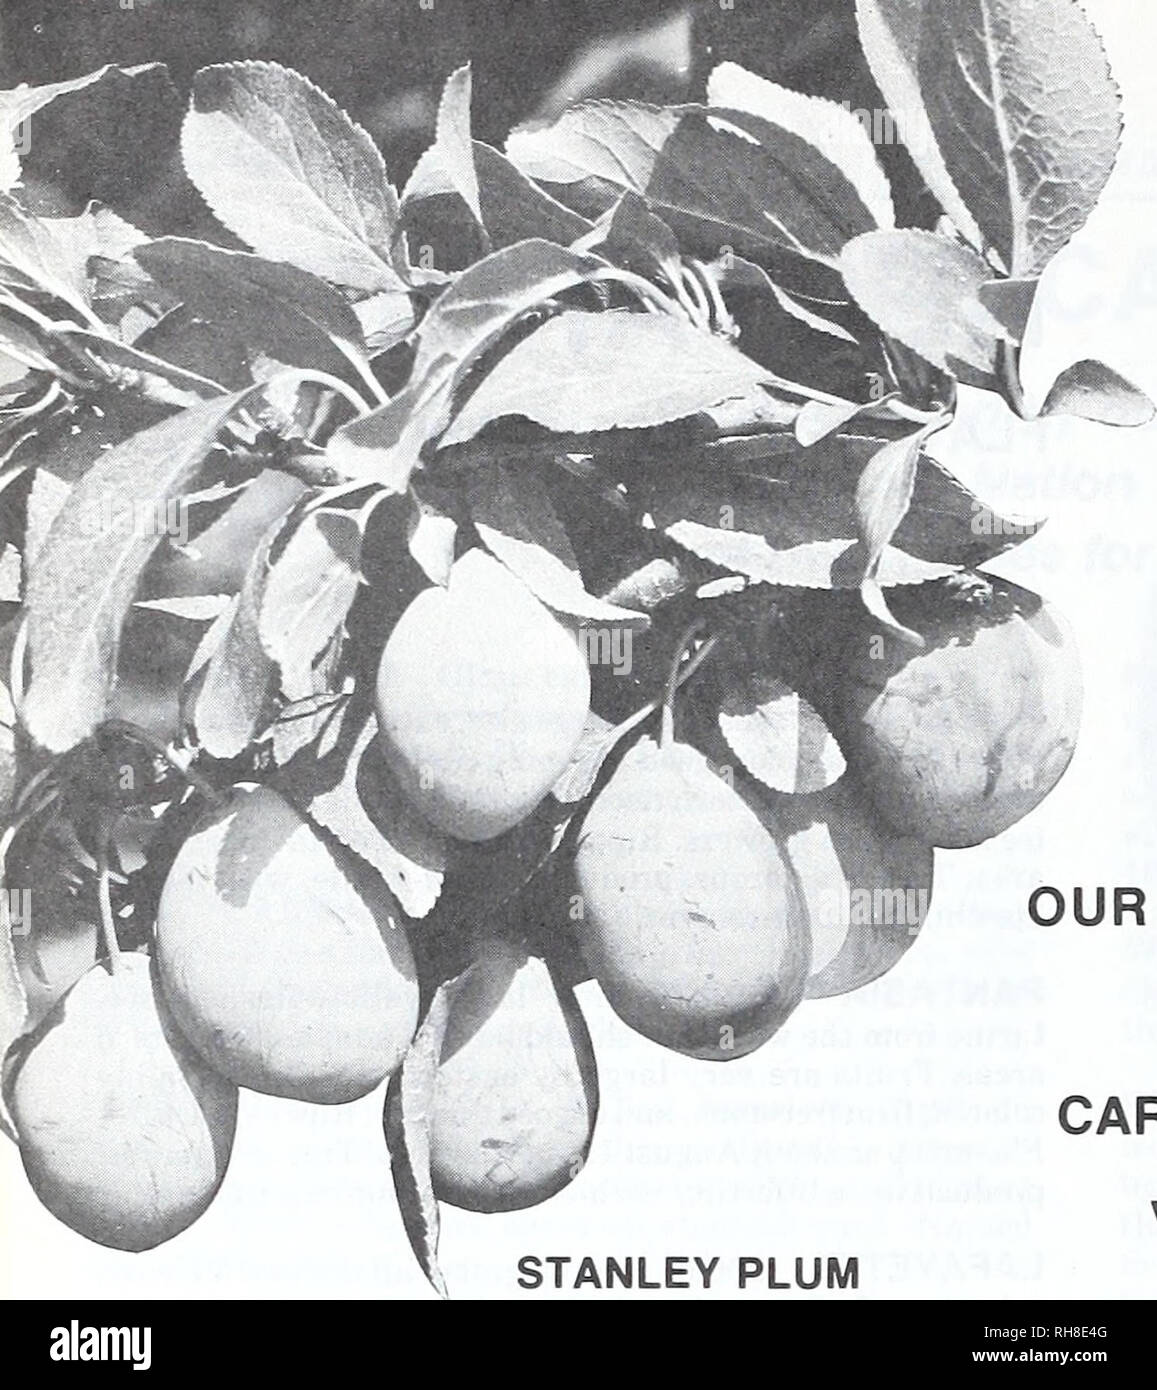 . Bountiful Ridge Nurseries : 1975 - 1976 retail and commercial growers price list. Nurseries (Horticulture) Catalogs; Fruit Catalogs; Fruit trees Catalogs; Trees Catalogs; Flowers Catalogs. STANLEY PLUM PLUMS OUR PLUM VARIETY LISTINGS HAVE BEEN CAREFULLY SELECTED TO SUPPLY A VARIETY FOR EVERY SECTION AND PURPOSE PRICES FOR ALL PLUM AND APRICOT VARIETIES For Larger Quantities, See Commercial Growers Price List in Center Fold 3-9 10-49 Each each each 5-6', &quot;/i6&quot; up $6.70 $6.15 $5.15 4-5', 9/i6-&quot;/i6&quot; 6.45 5.80 4.85 3-4', 7/16-9/16&quot; 6.15 5.45 4.55 2-3', 5/16-7/1 e&quot; 5 Stock Photo